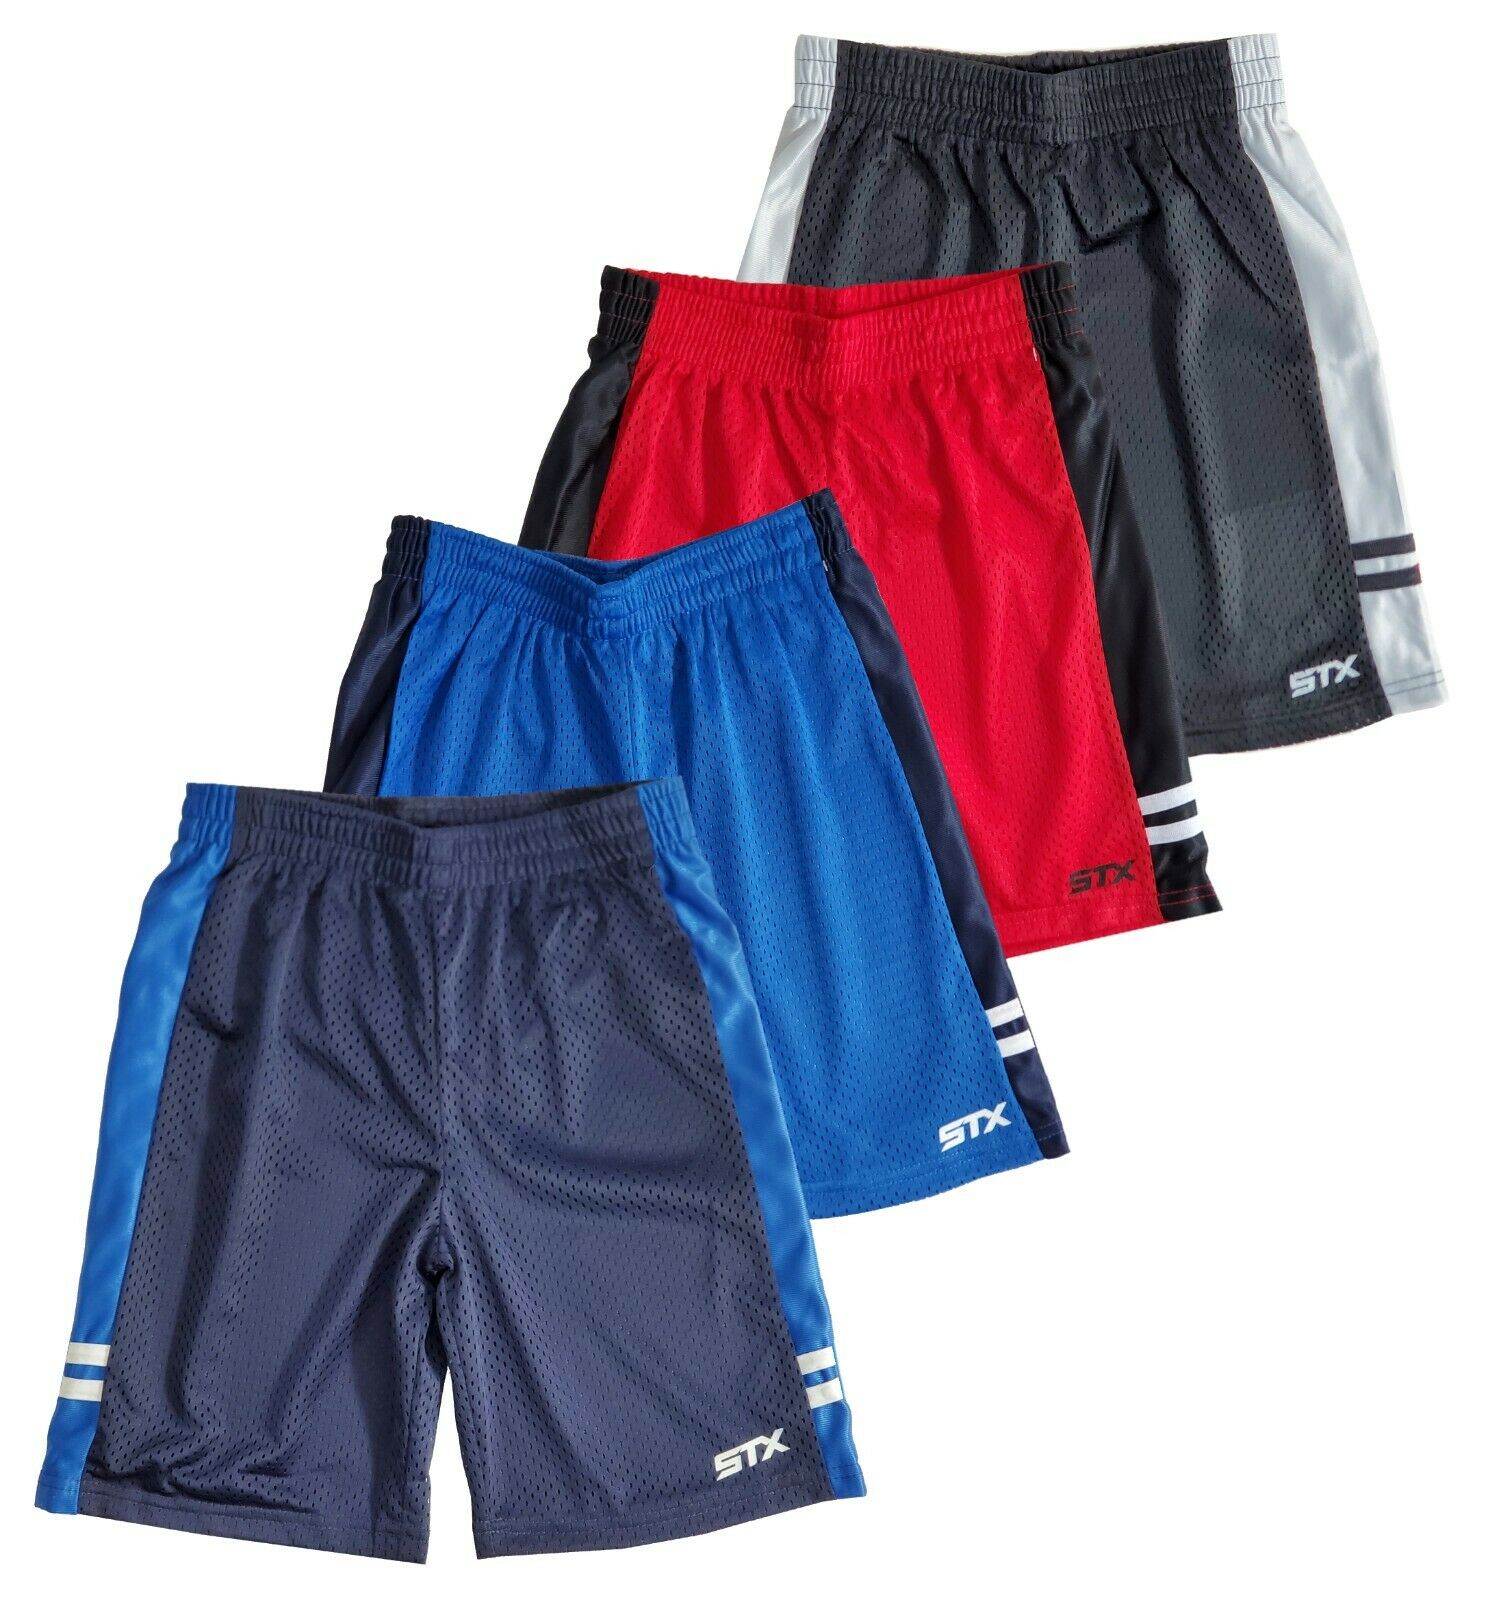 Shorts Boys Athletic Regular Fit Active Mesh 4 Pack Lot Size 8 10/12 14/16 Navy